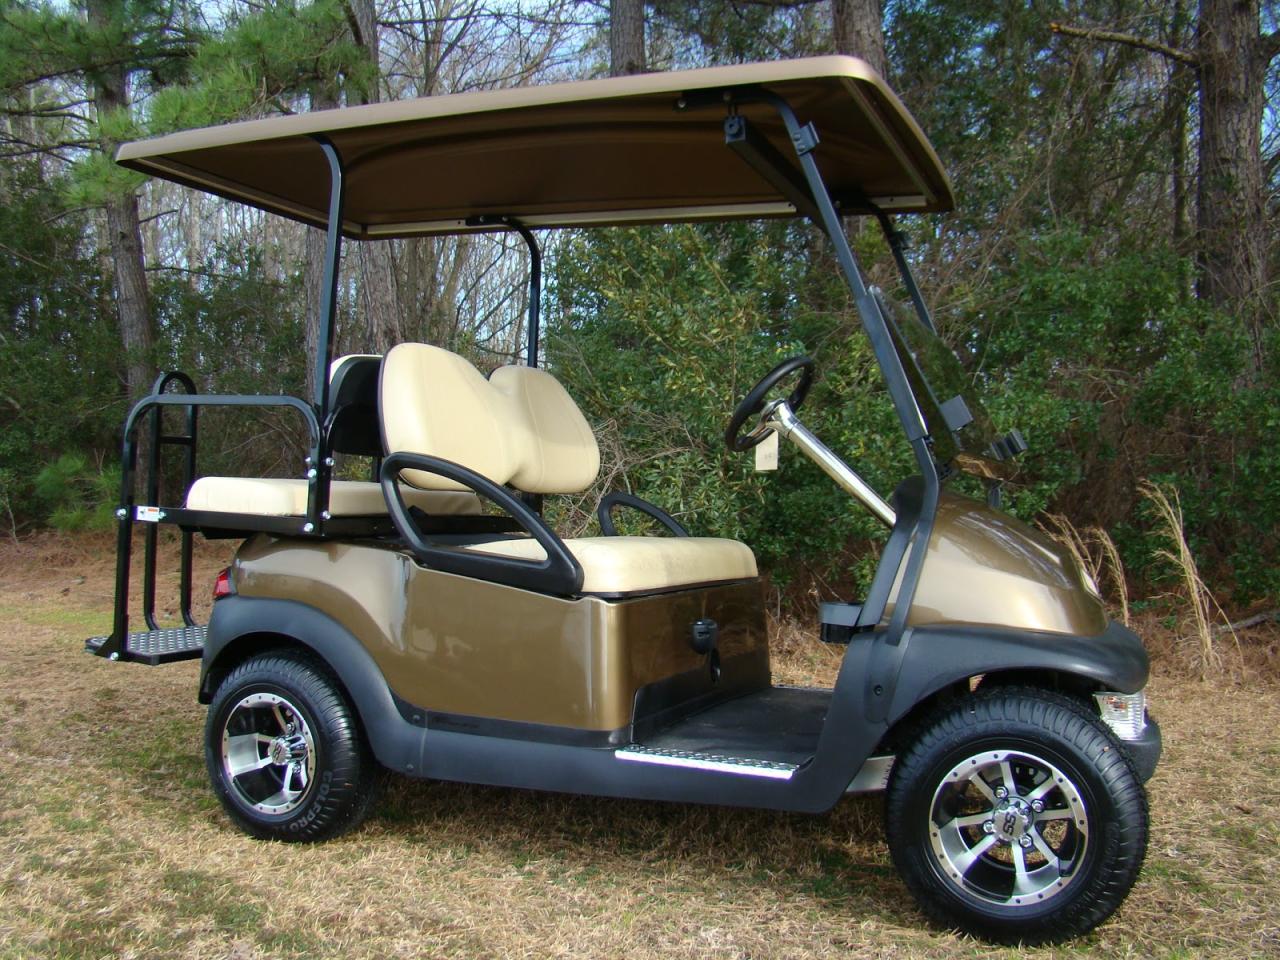 Used Golf Carts for Sale by Owner in Webb, Texas: A Comprehensive Guide